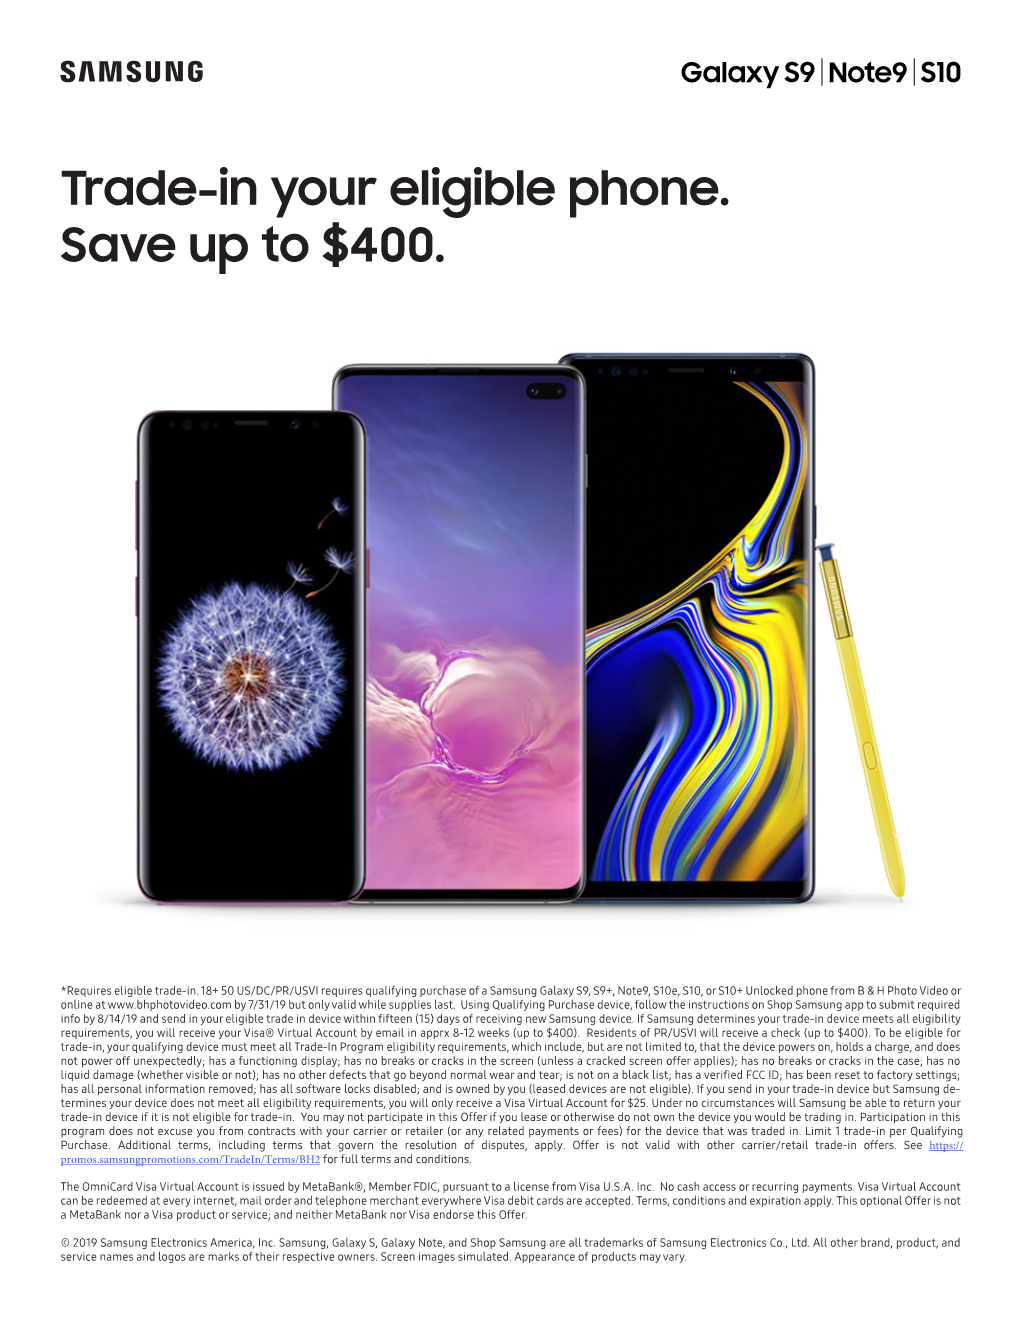 Trade-In Your Eligible Phone. Save up to $400